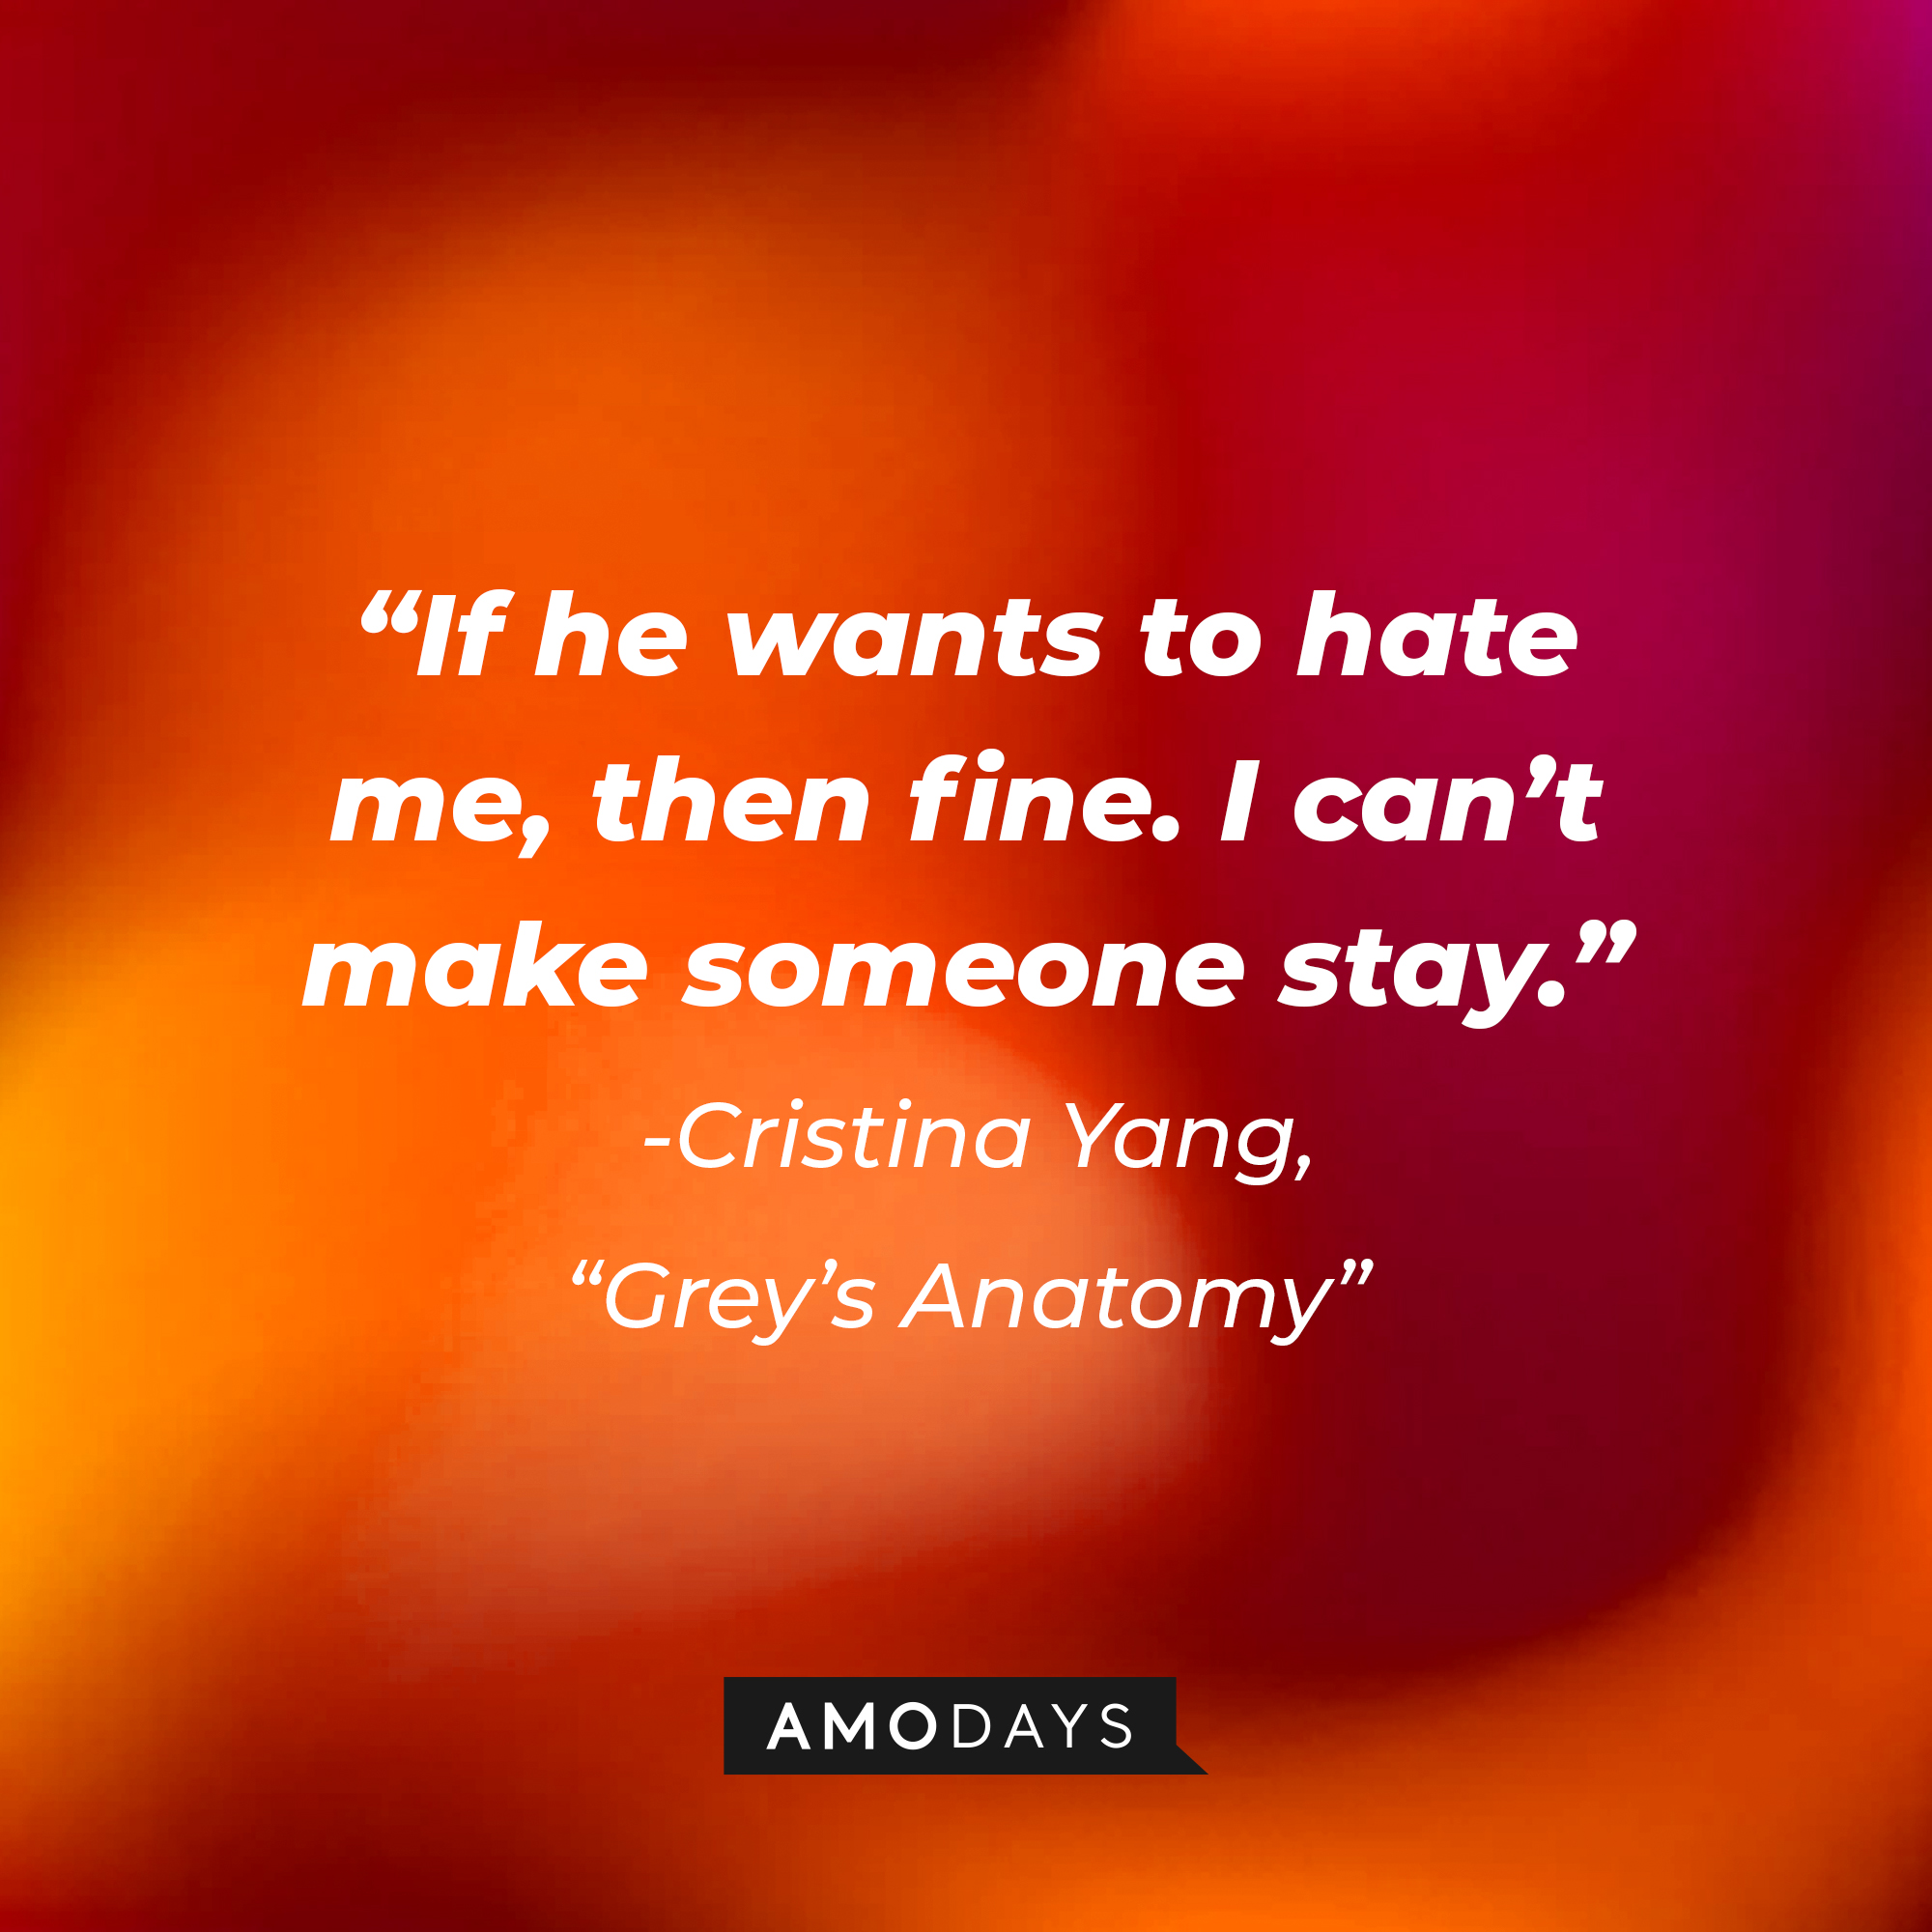 Cristina Yang's quote on "Grey's Anatomy:" "If he wants to hate me, then fine. I can’t make someone stay.”| Source: AmoDays